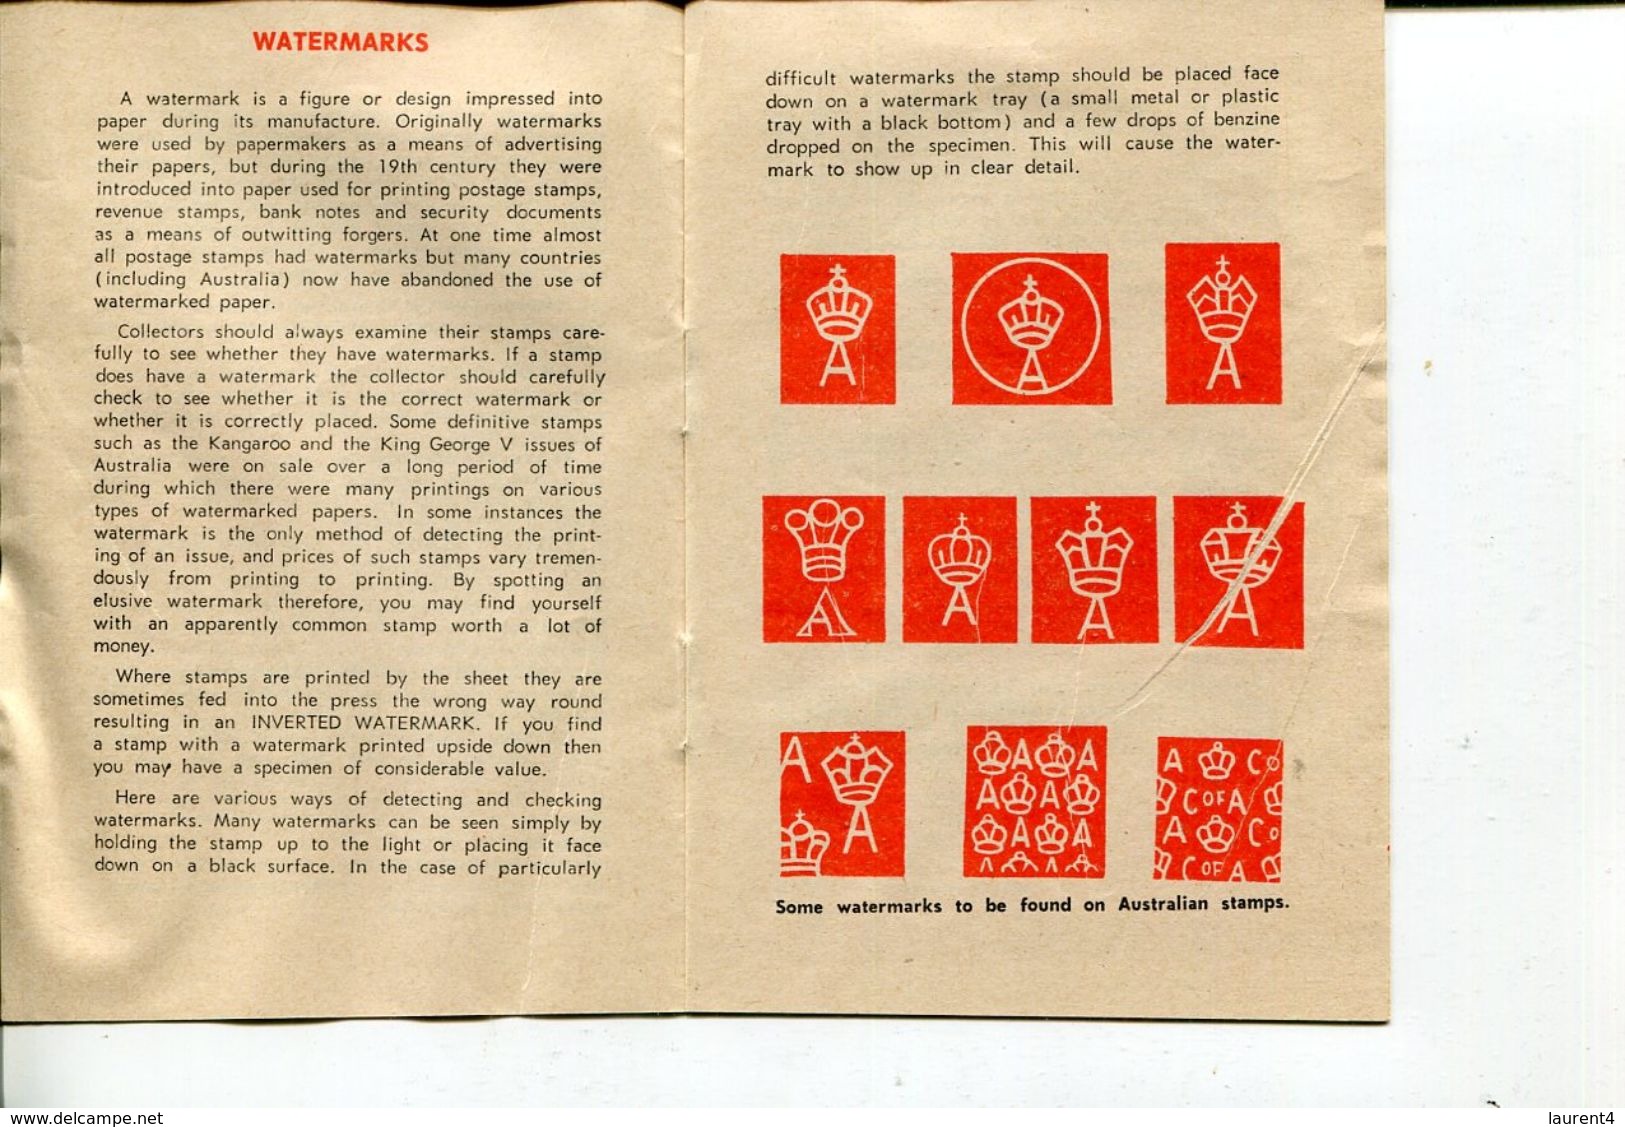 (444) Australia - Stamp Detective (mini Book About Stamp Collecting) Scan Include Sample Pages... Circa 1950-60 ? - Filatelie En Postgeschiedenis